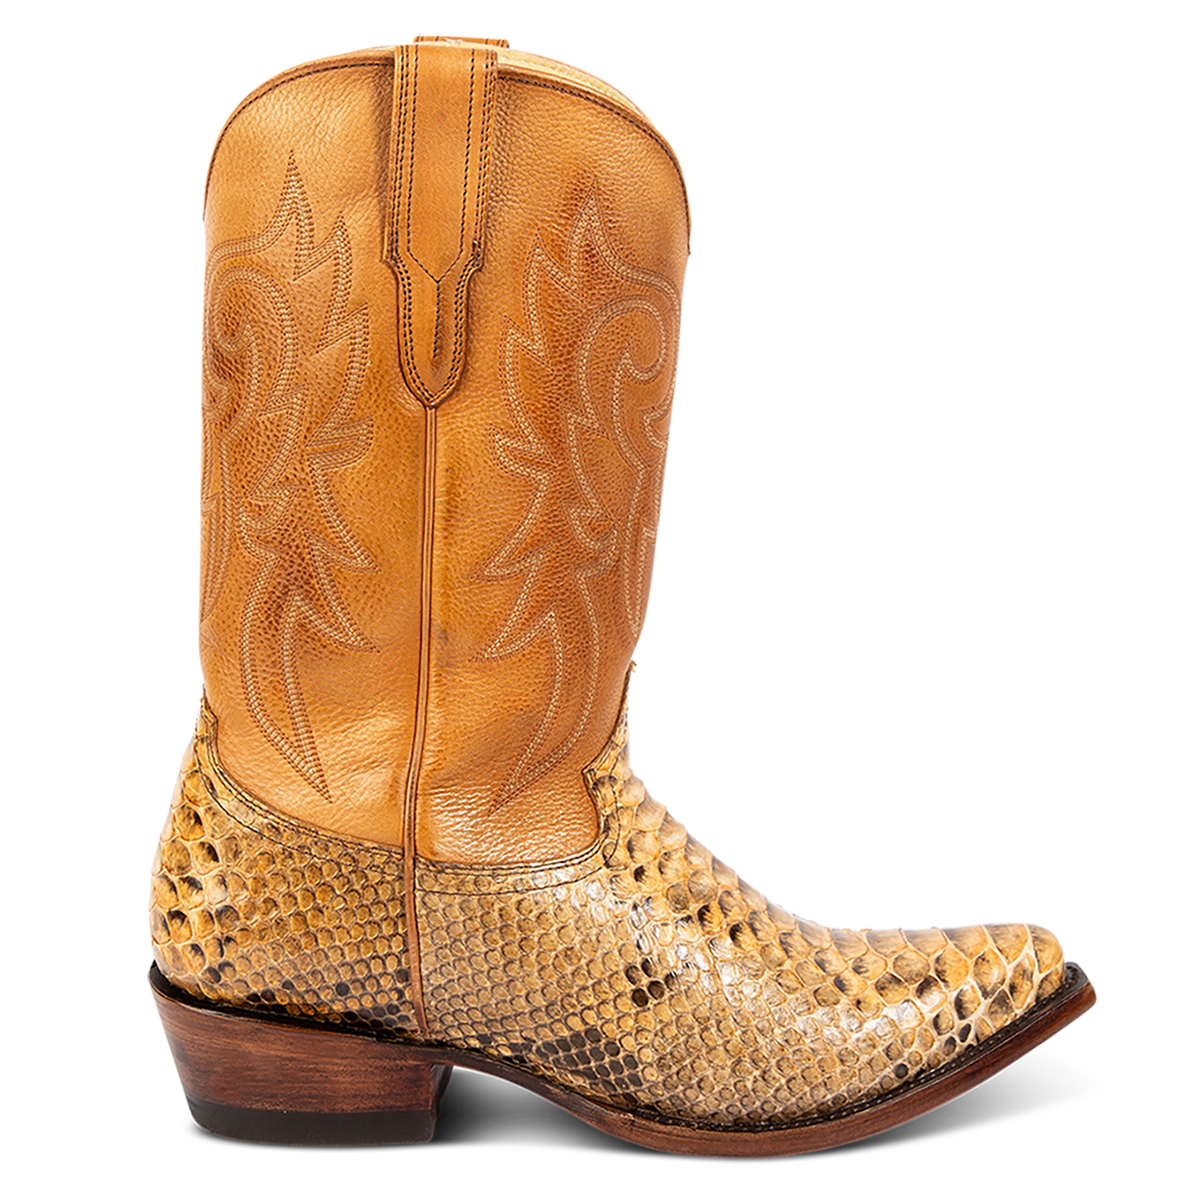 FREEBIRD men's Marshall canary python leather western cowboy boot with shaft stitch detailing, snip toe construction and leather pull straps